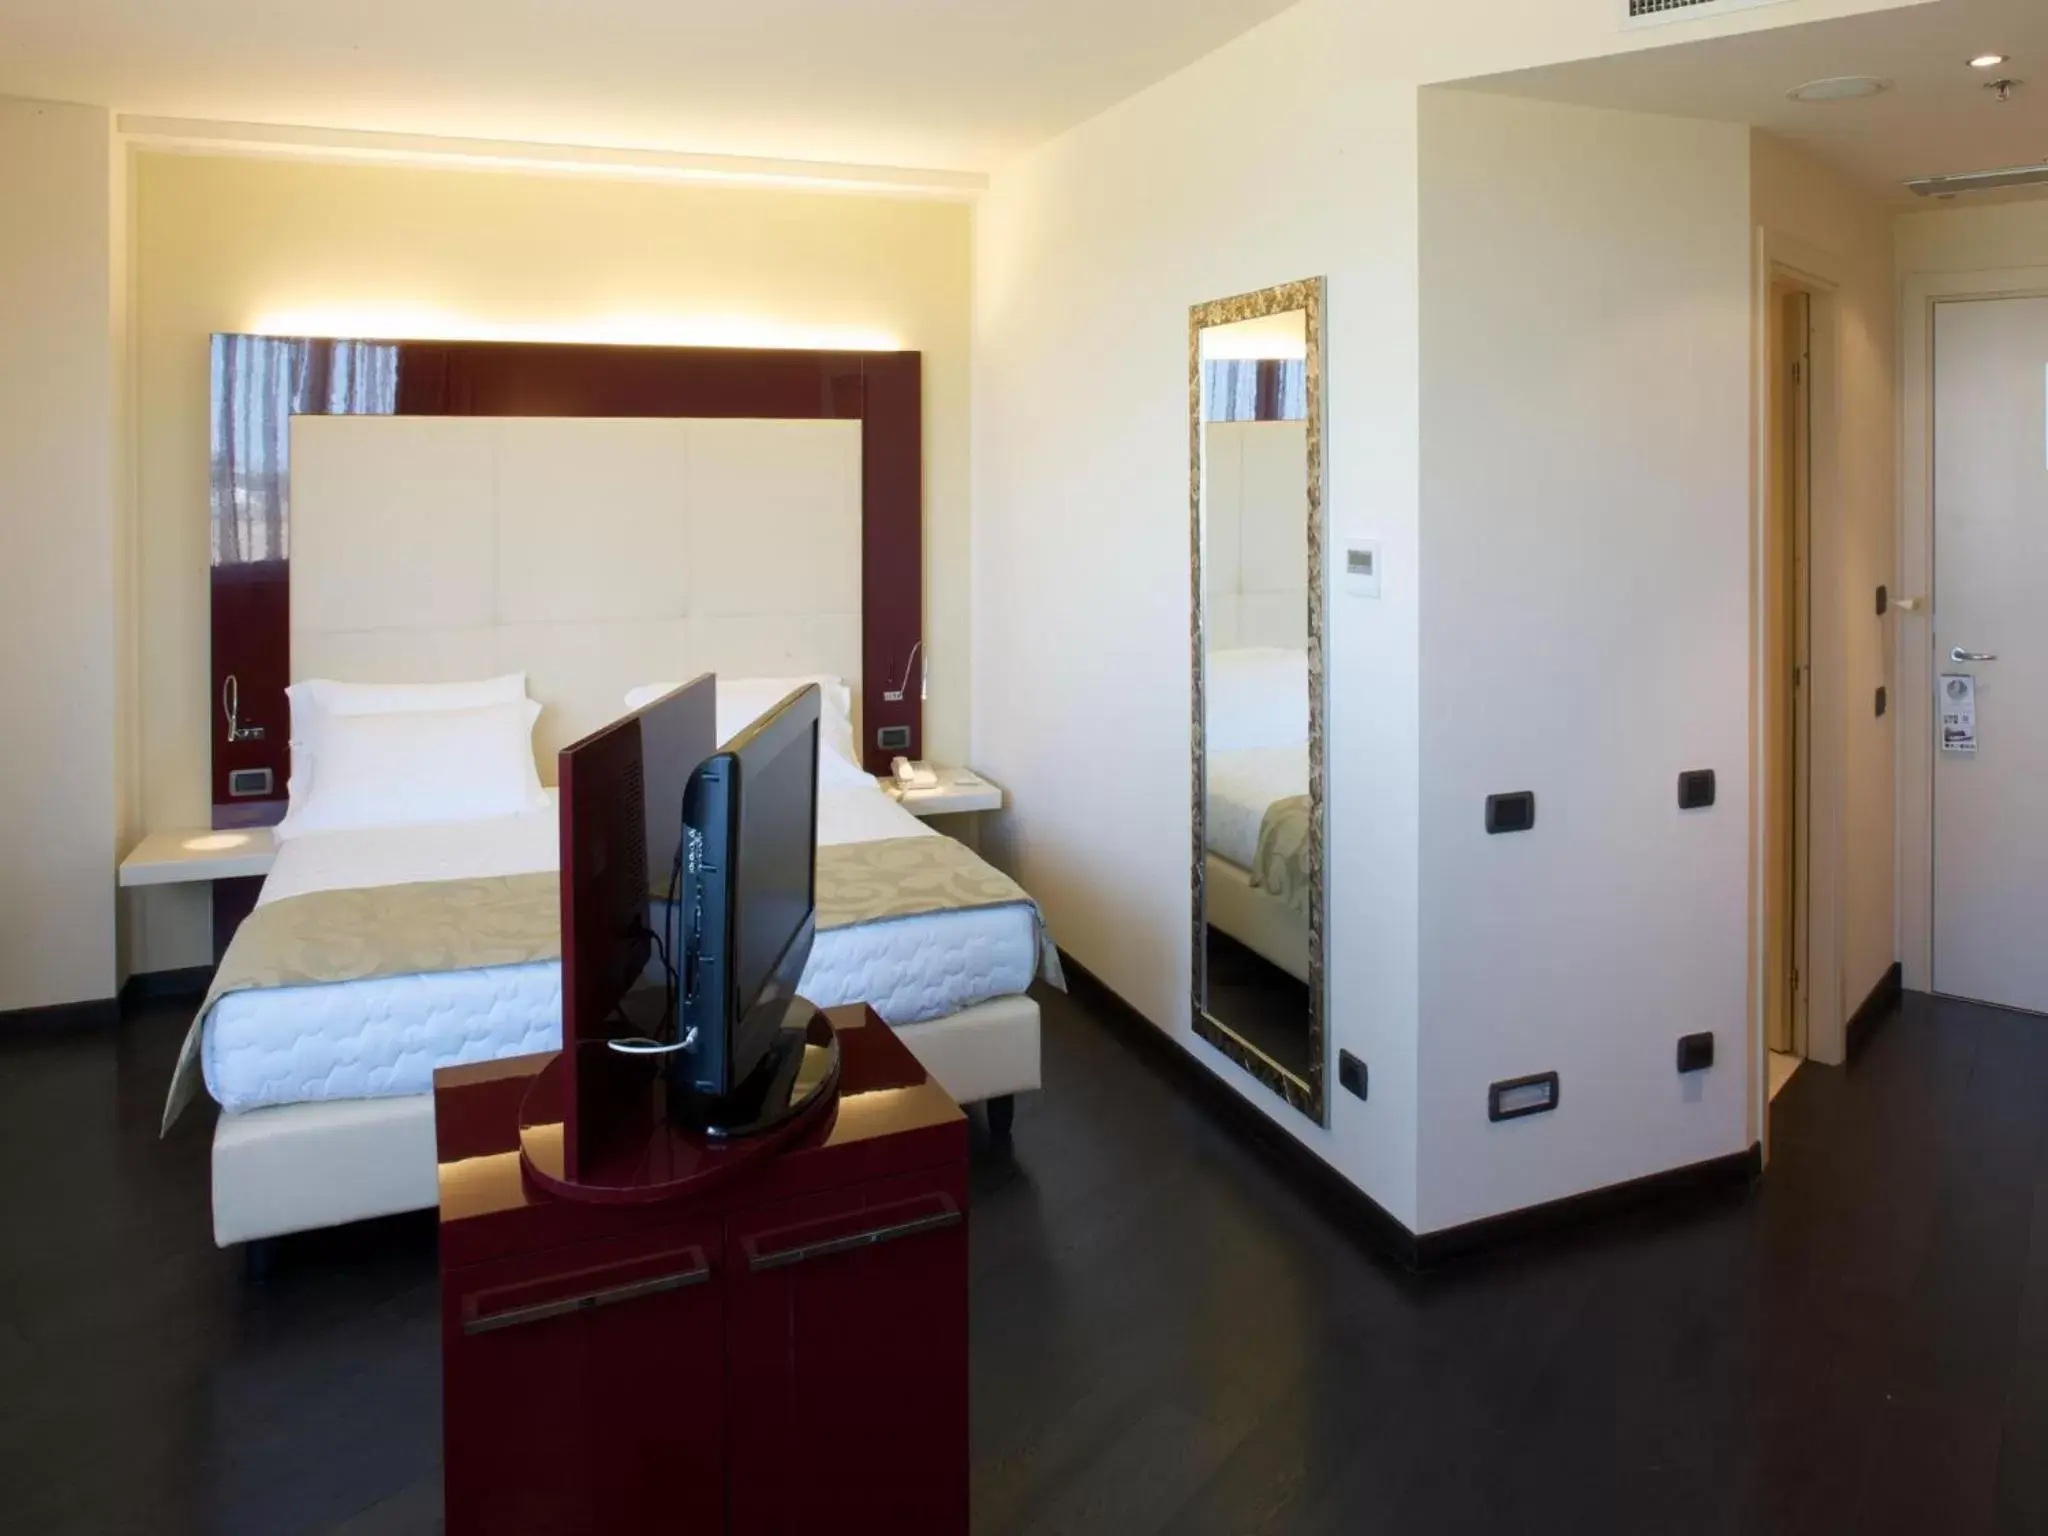 TV and multimedia, TV/Entertainment Center in Grand Hotel Mattei